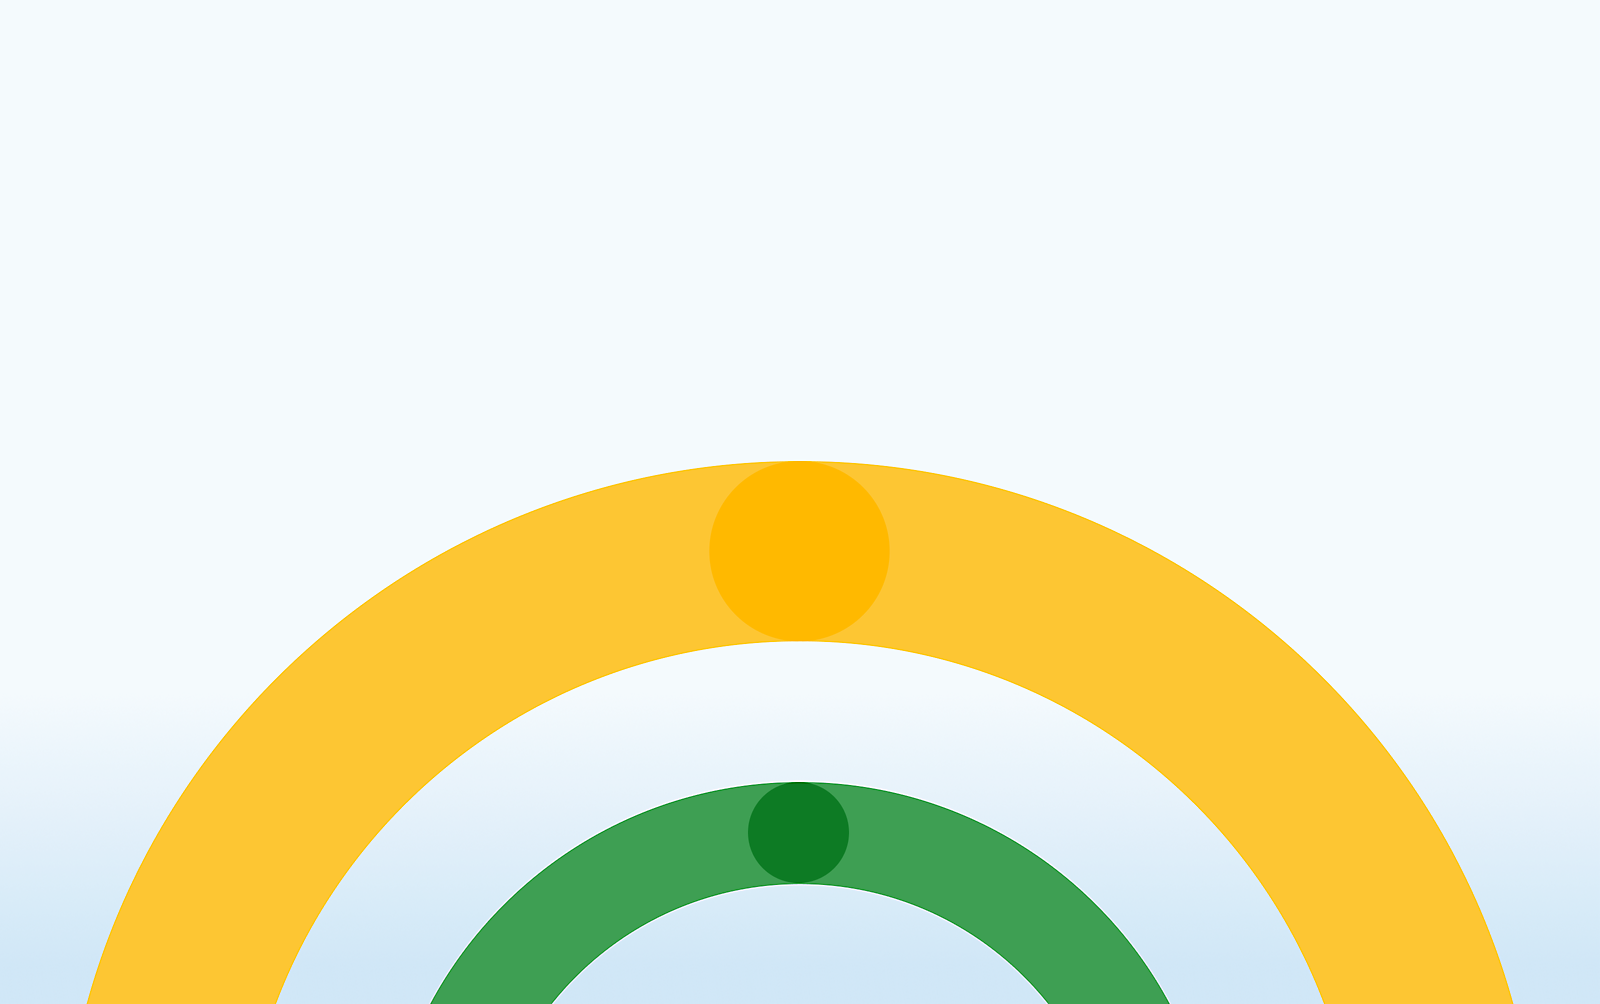 Abstract image featuring three concentric arcs in shades of blue, orange, and yellow on a white background.